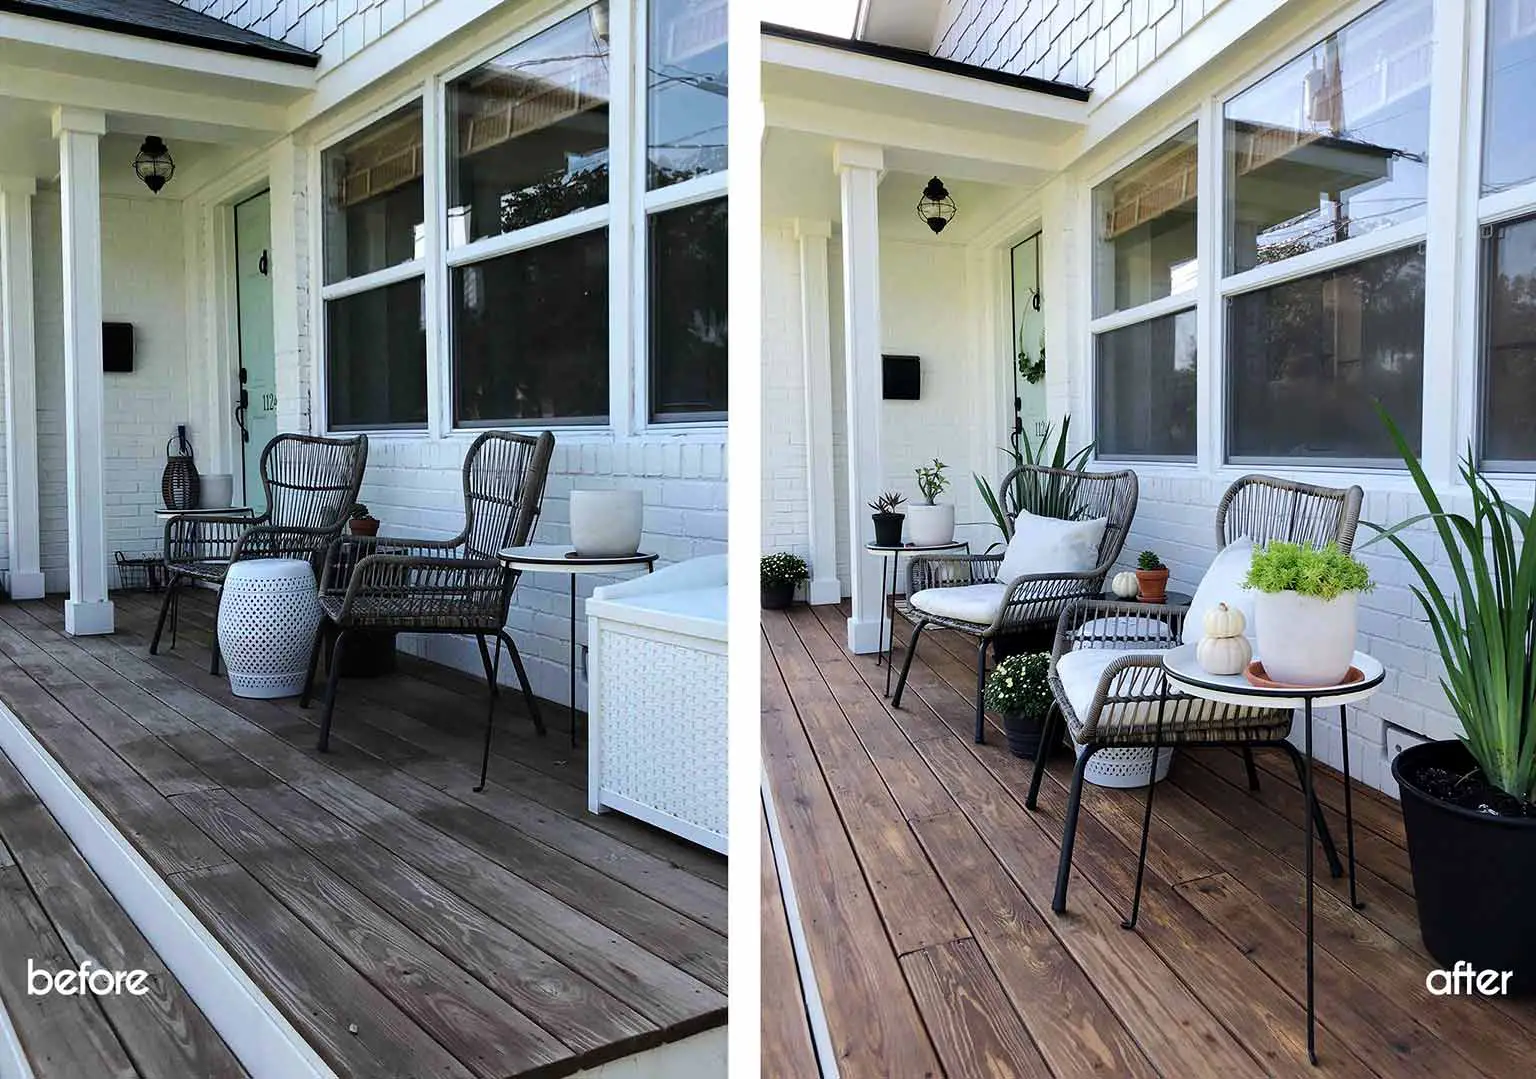 Before and after - Front porch fall makeover reveal - That Homebird Life Blog